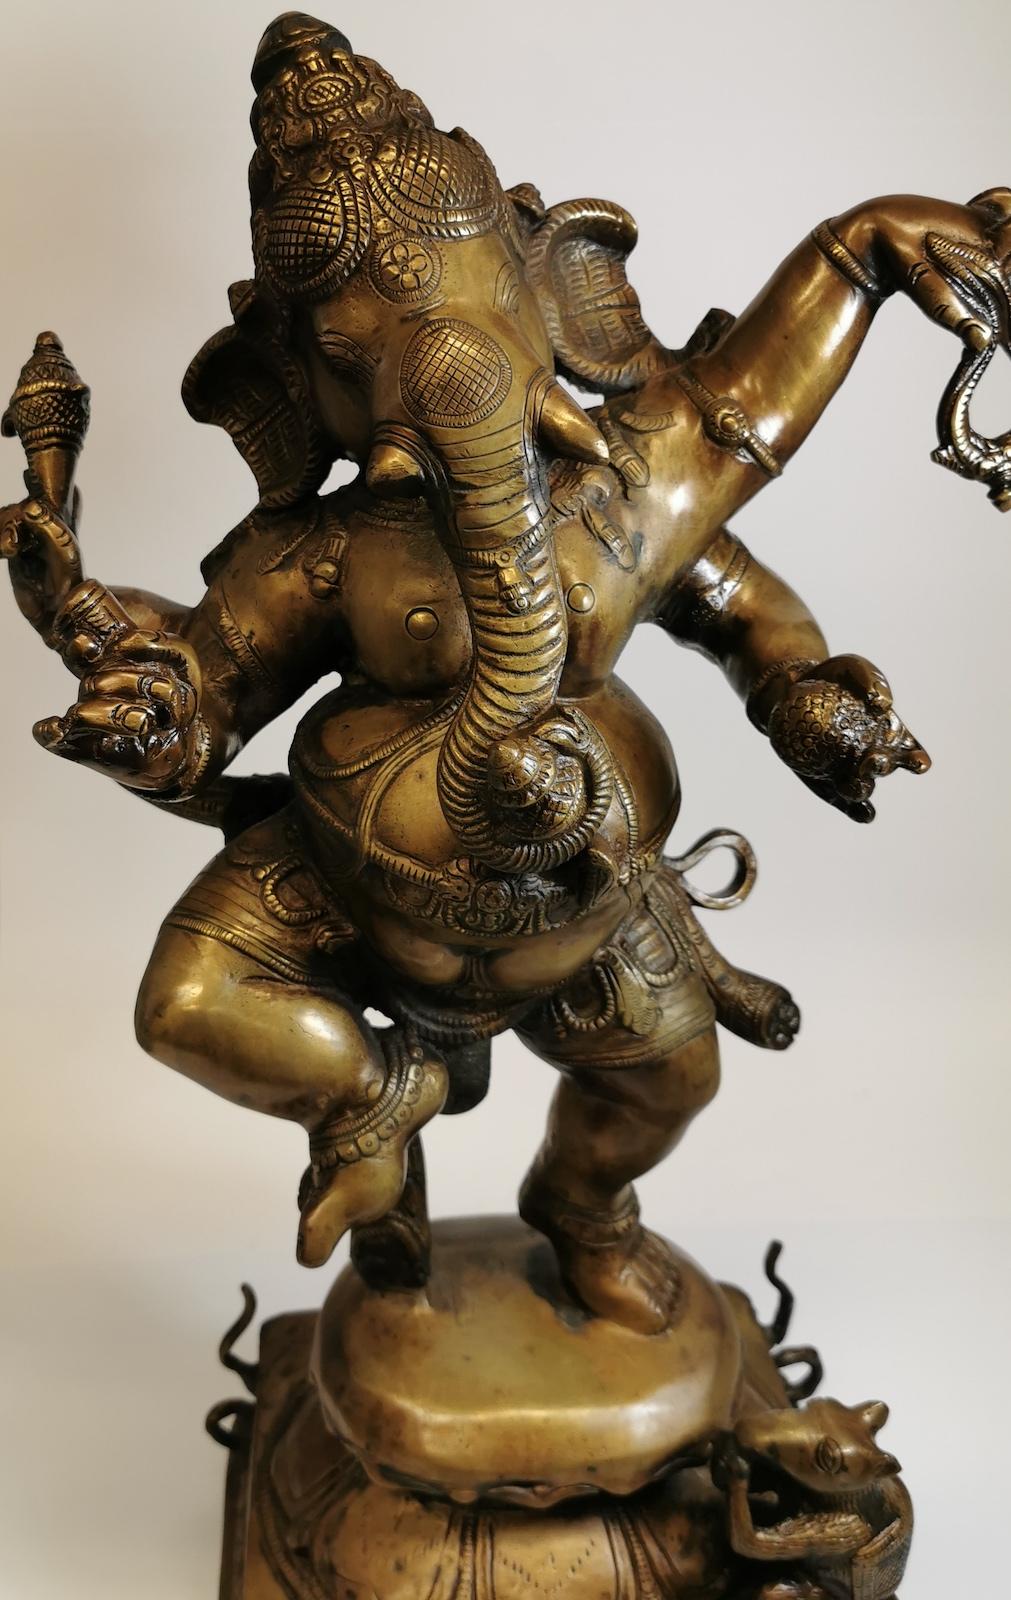 Indian brass highly detailed dancing four-arm Lord Ganesha deity statue, 
weighs 19kg.
Our eclectic stock crosses cultures, continents, styles and famous names.